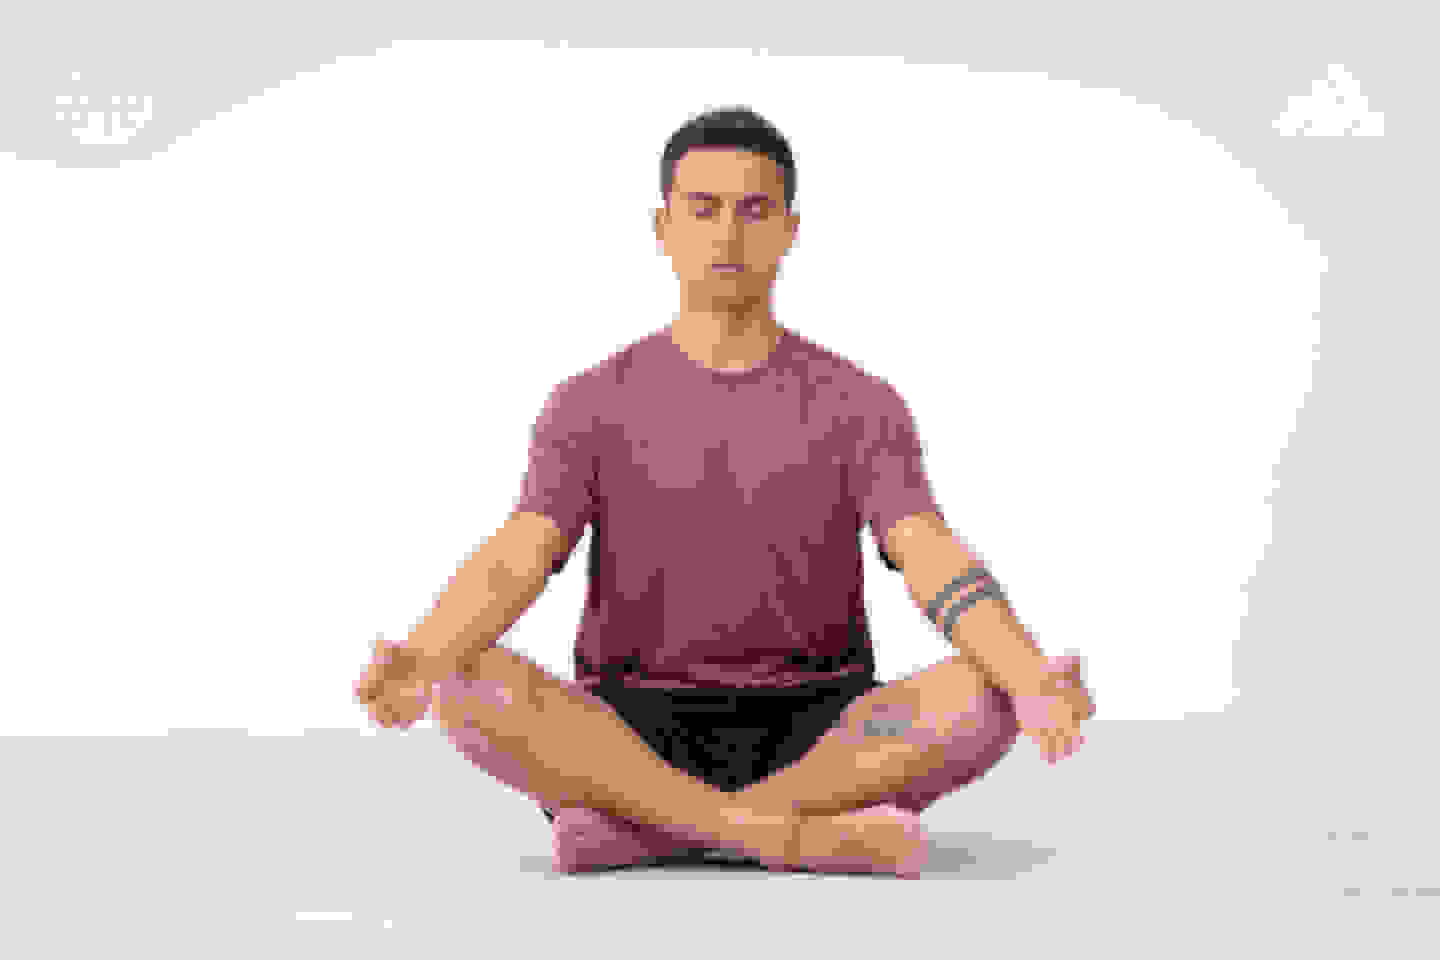 Football player Paulo Dybala is seated in a yoga pose, wearing an outfit from th Make Space Yoga collection.